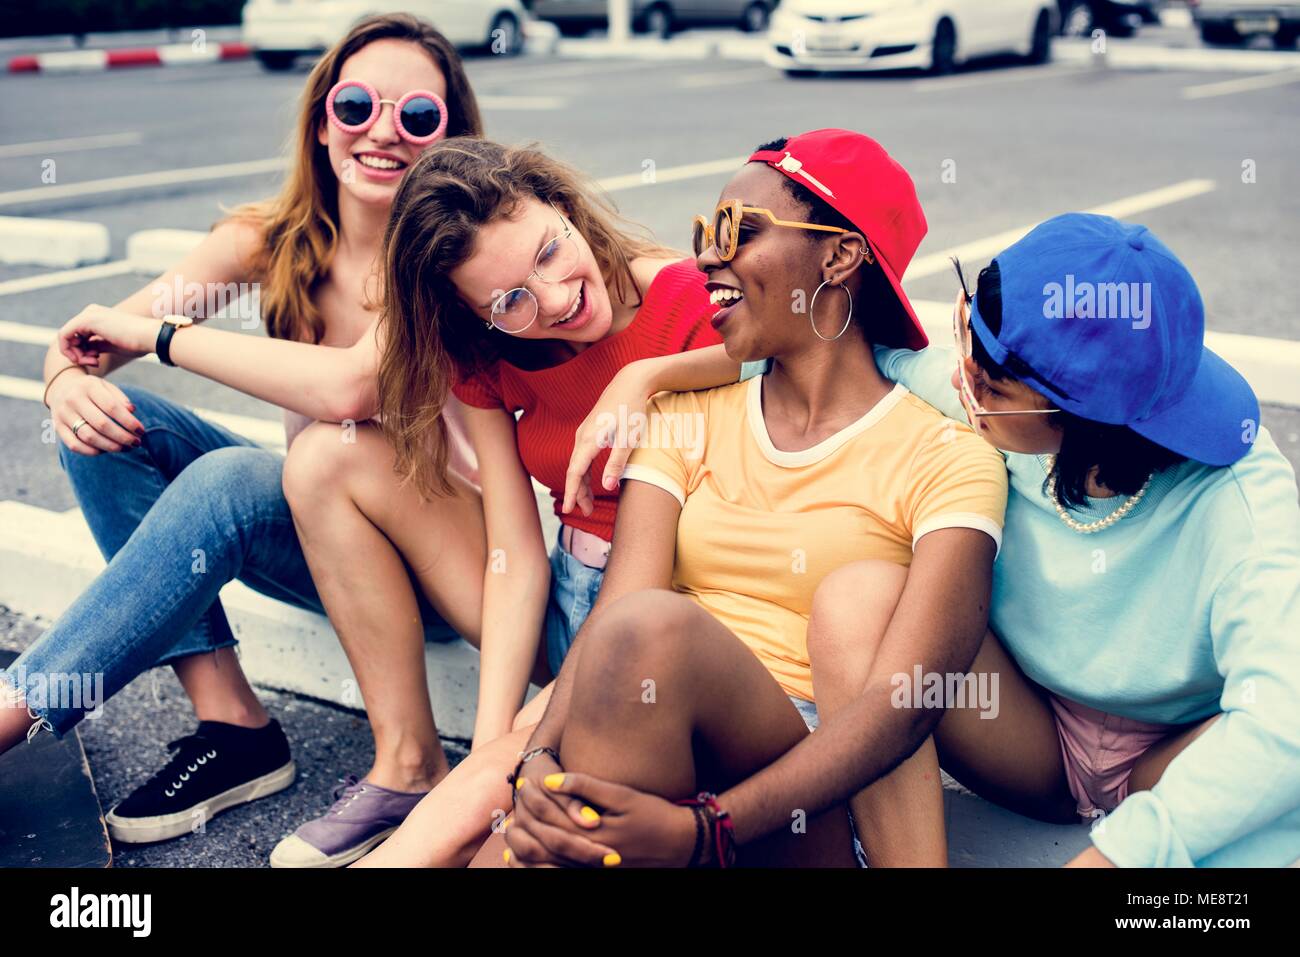 Group of diverse women having fun together Stock Photo